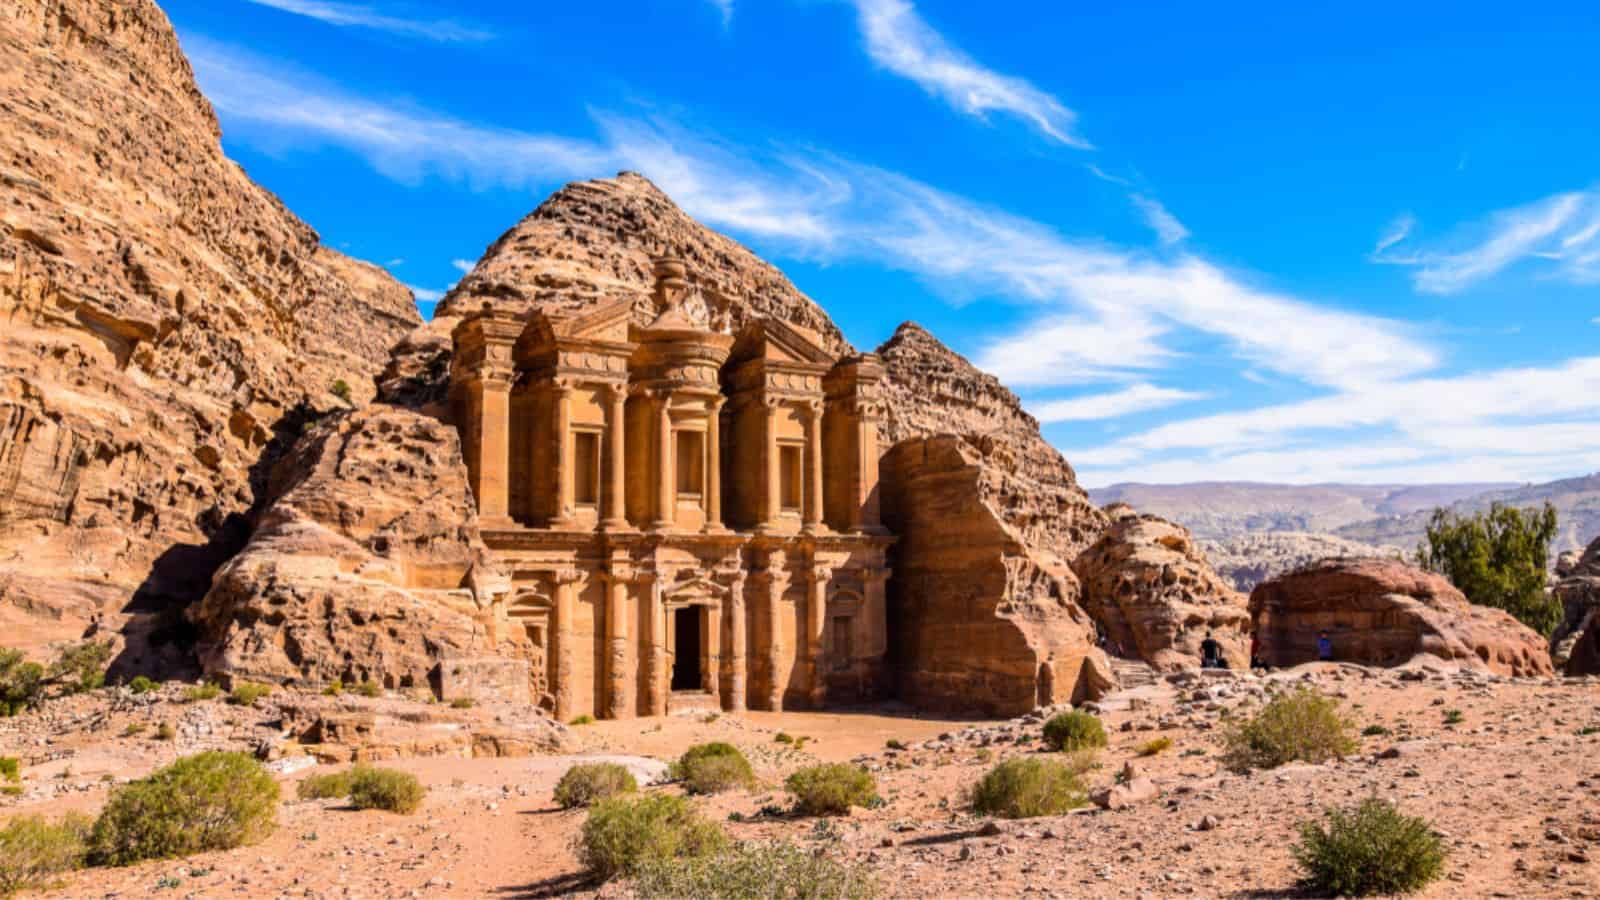 <p><a href="https://www.businessinsider.com/petra-jordan-7-wonders-of-the-world-indiana-jones-2018-7?r=US&IR=T#:~:text=The%20ancient%20city%20of%20Petra,The%20Last%20Crusade%20in%201989.">Business Insider</a> reports that this 10,000-year-old city carved directly into red sandstone cliffs is one of the newest wonders of the world. Petra was once the thriving capital of the Nabataean Kingdom and is now an archaeological wonder, famed for its intricate façades, ingenious water conduit system, and its blend of Eastern and Hellenistic architectural styles.</p>